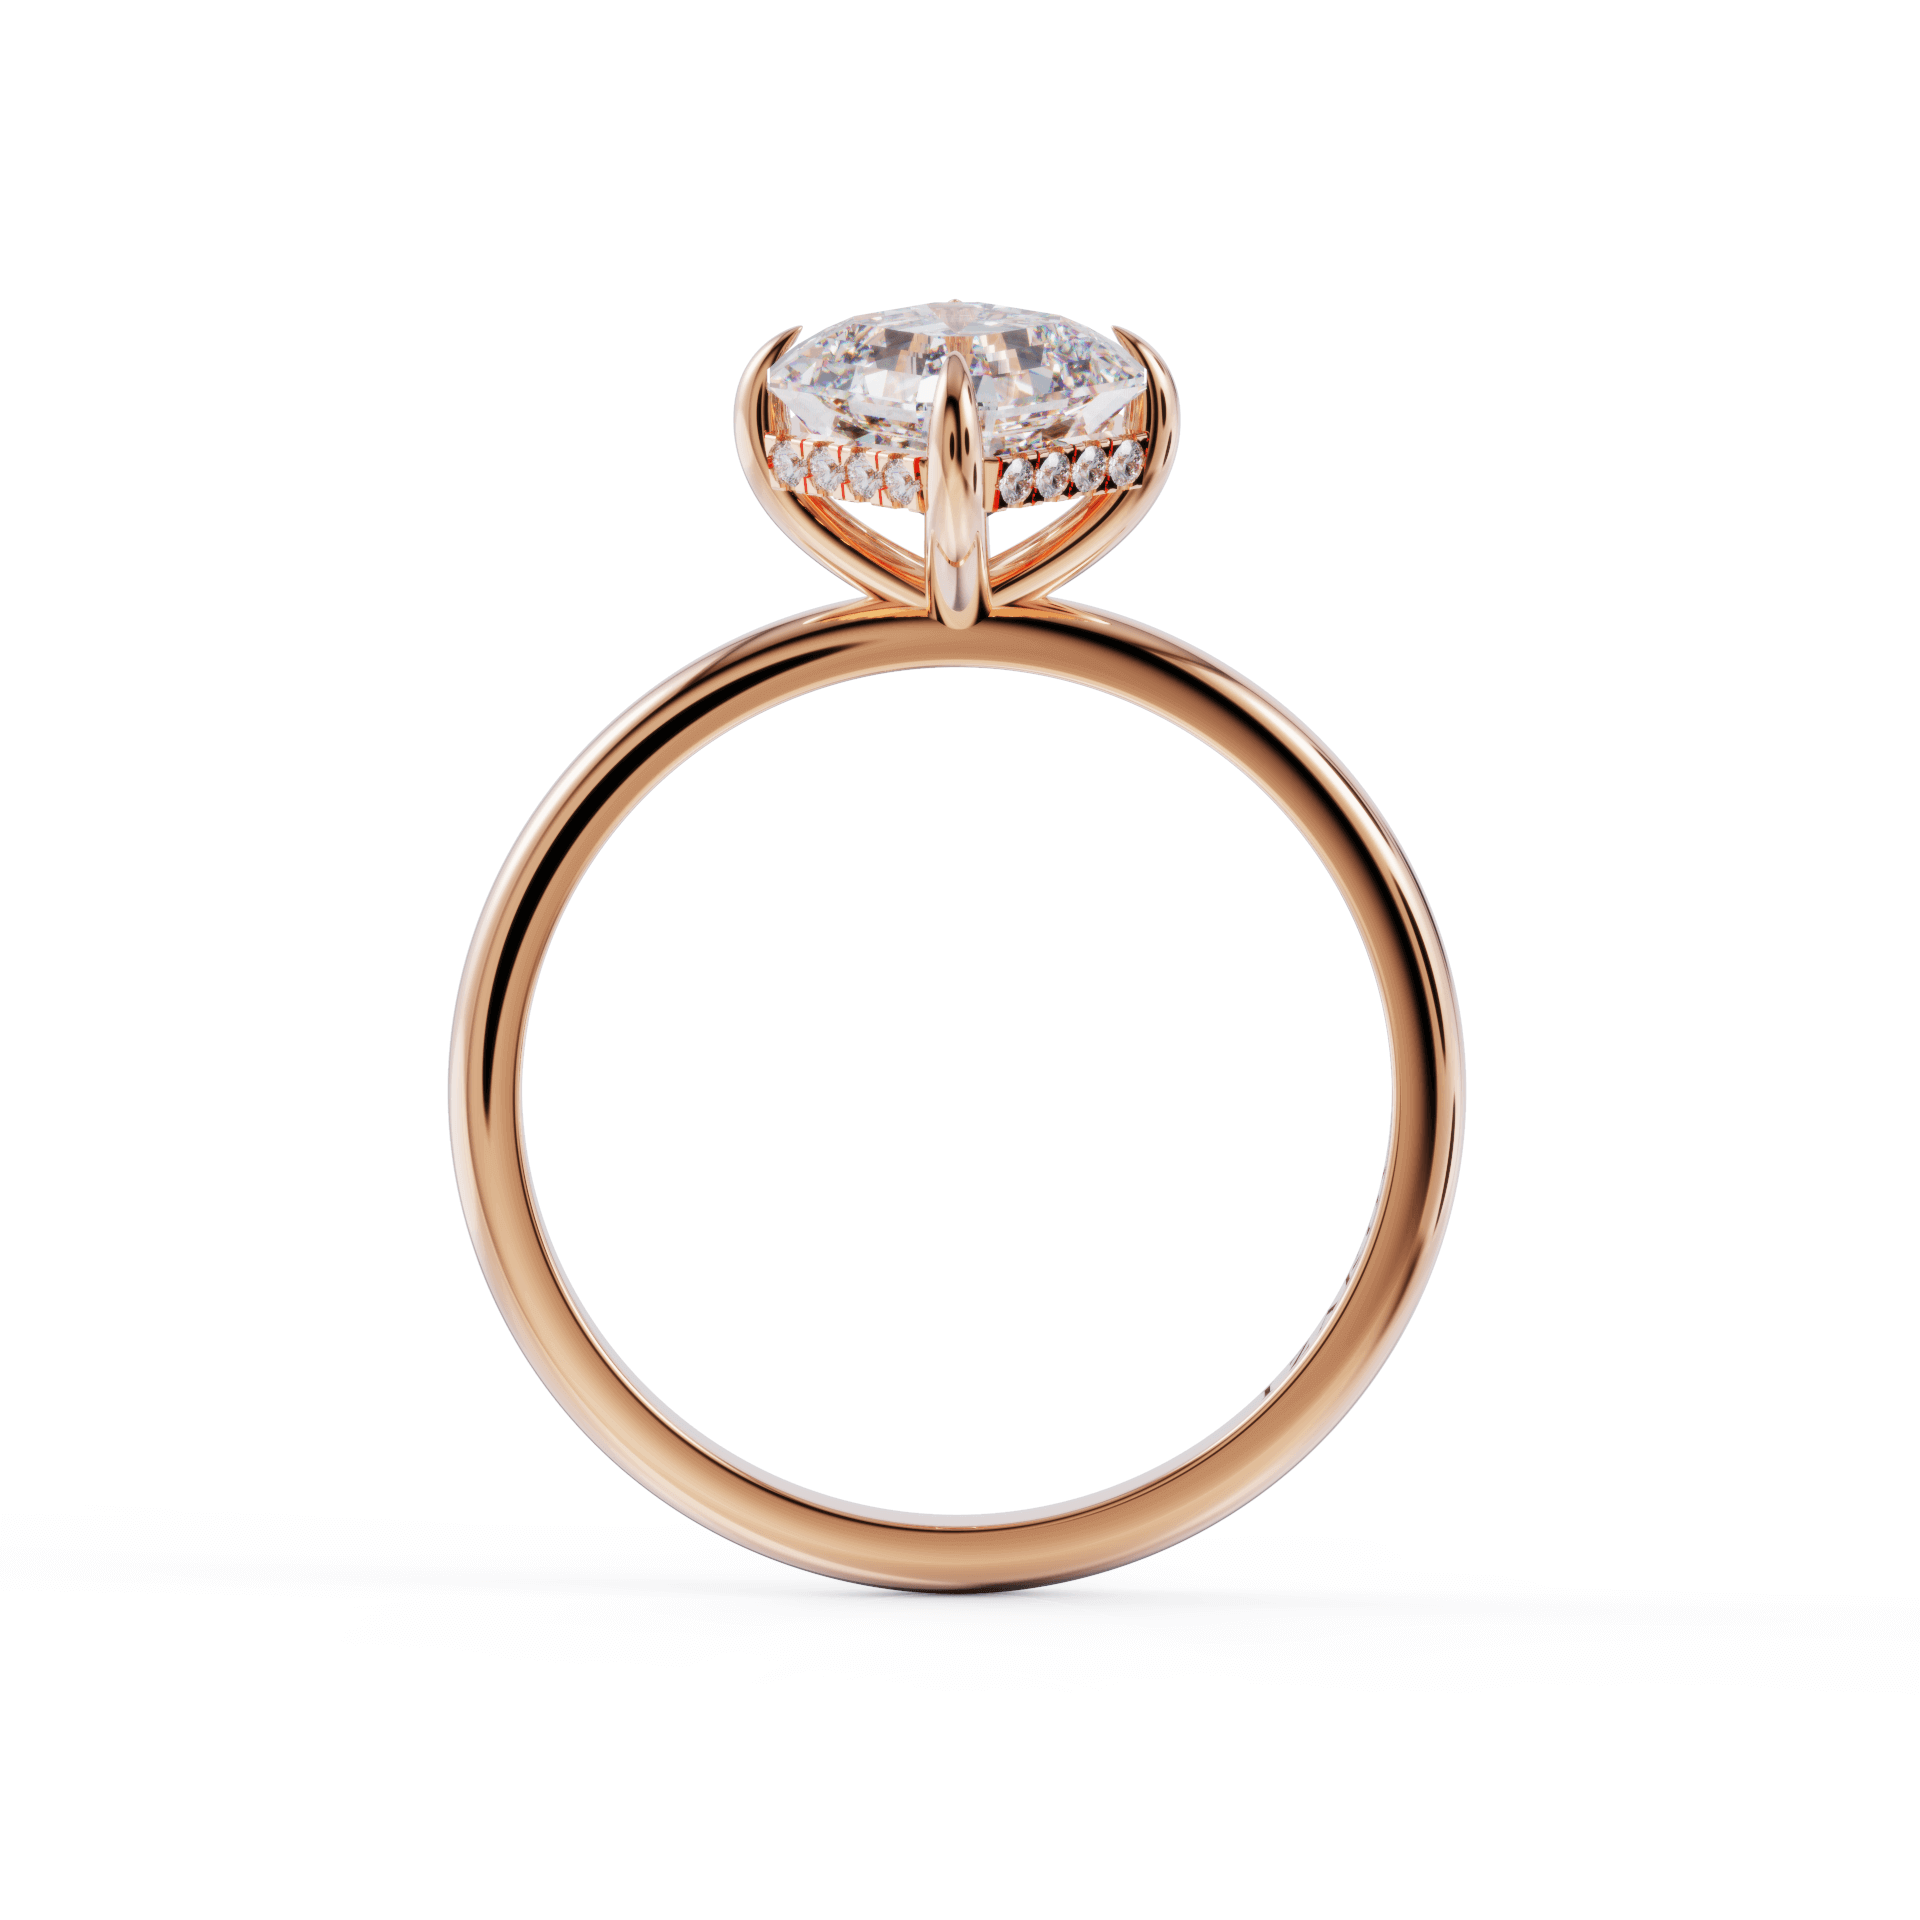 North West Hidden Halo Solitaire Diamond Engagement Ring Rings by VDBRC | Izakov